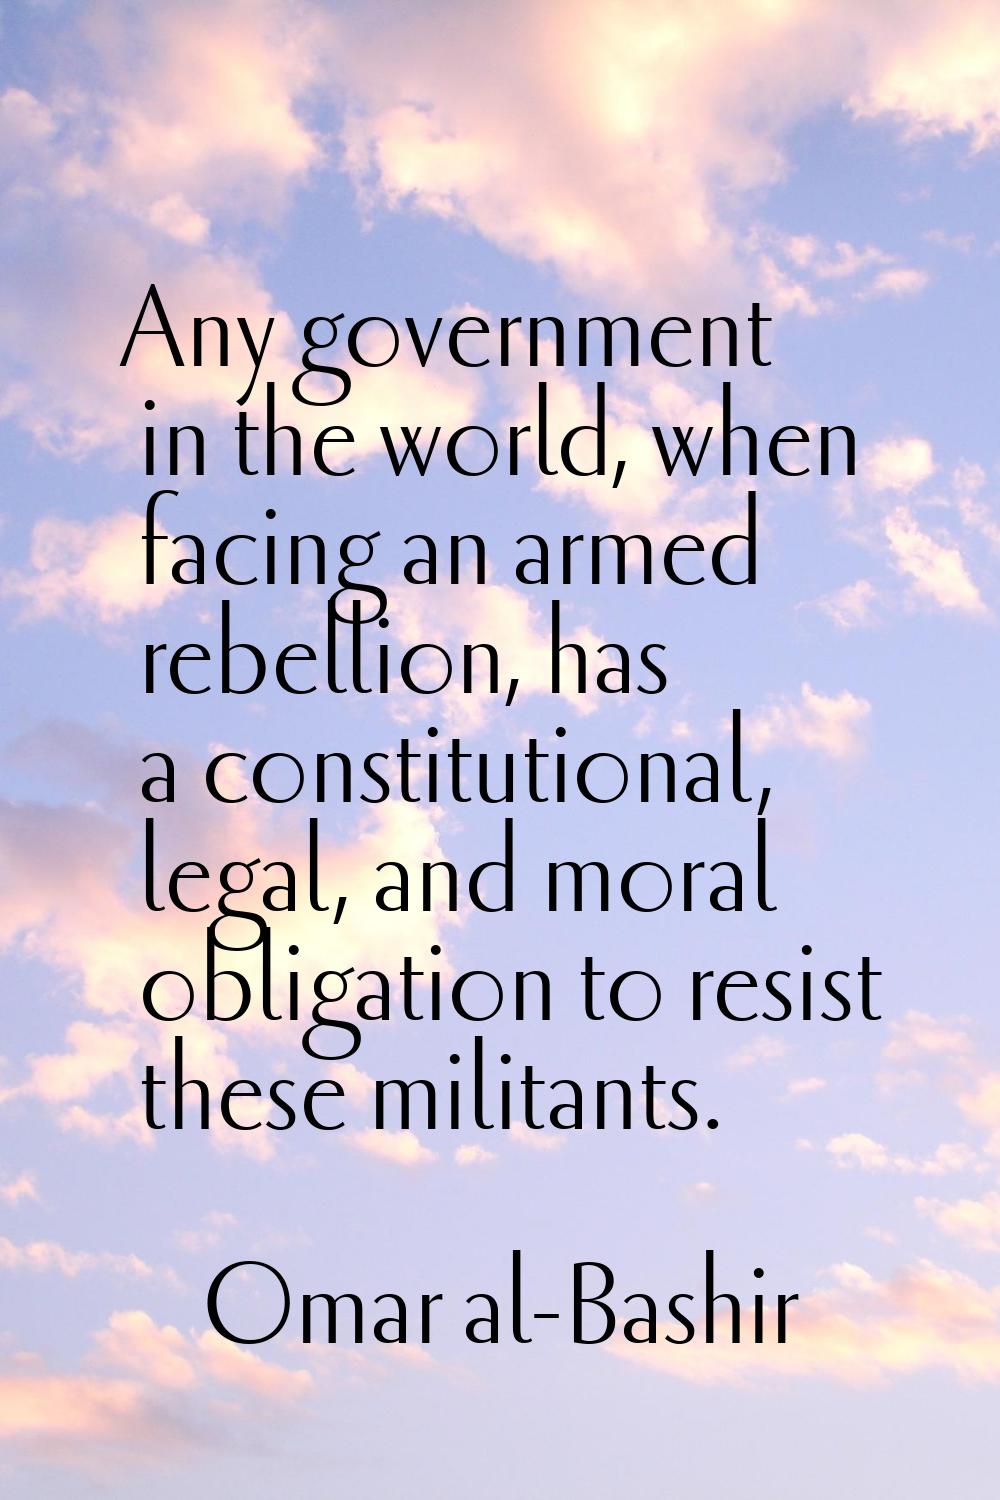 Any government in the world, when facing an armed rebellion, has a constitutional, legal, and moral